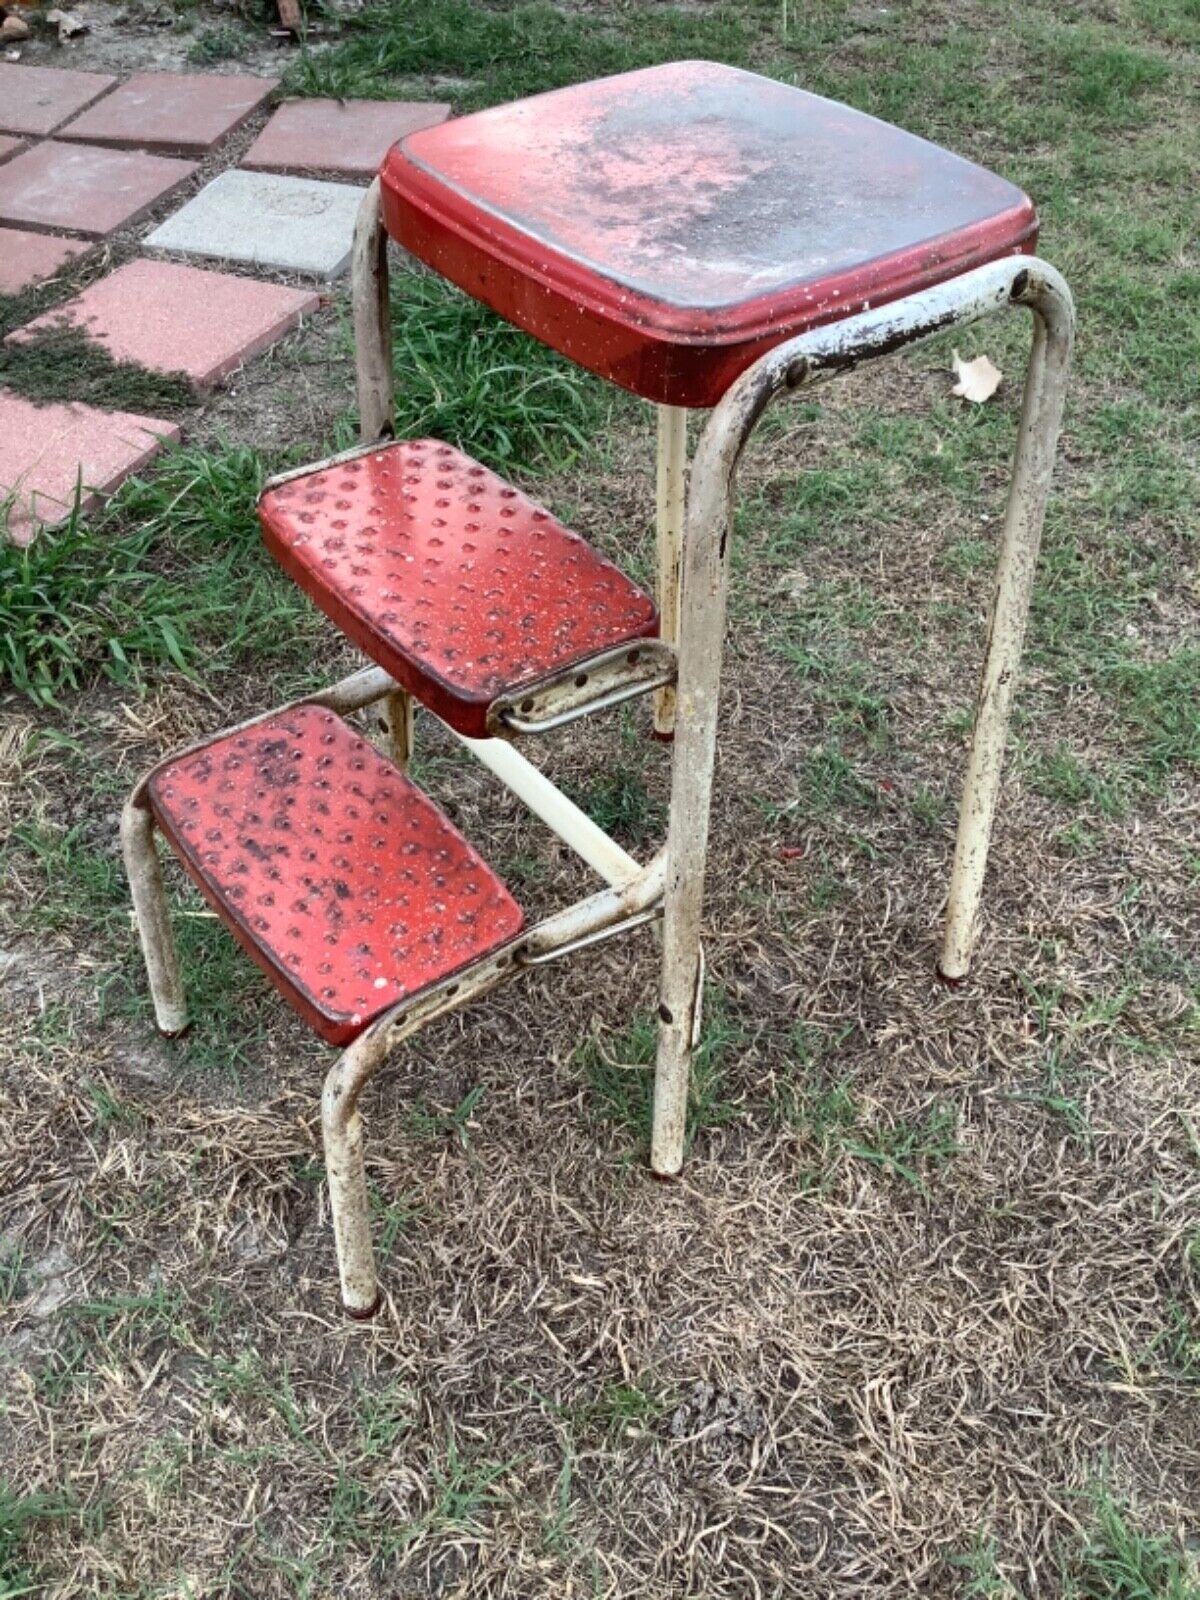 Vintage Cosco Red & White Kitchen Step Stool  chair Ladder Seat fold out Steps